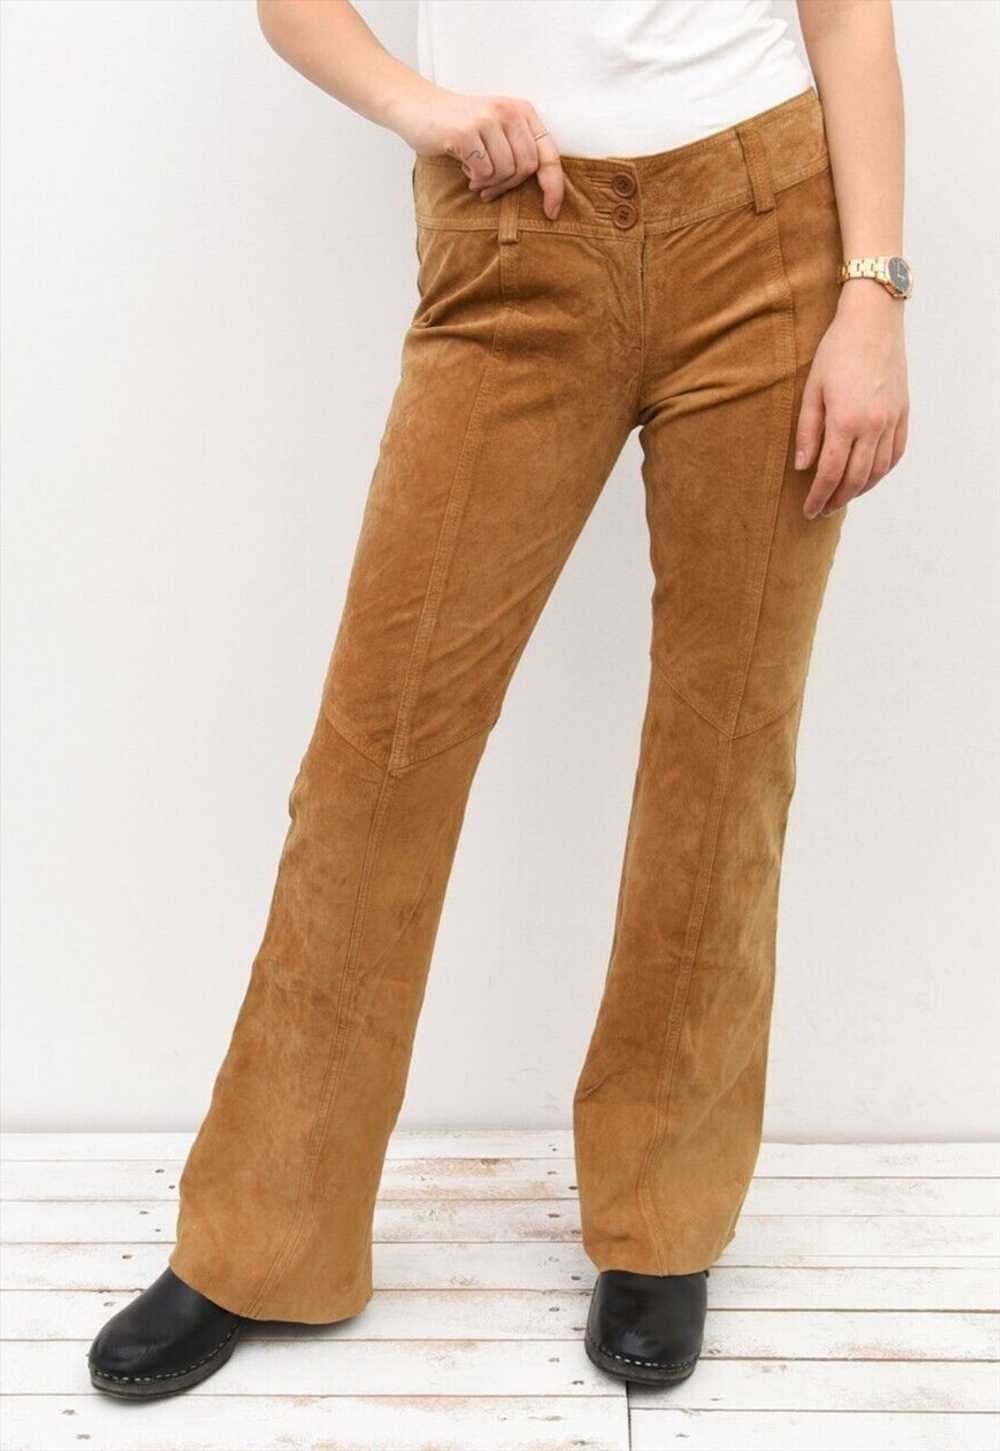 W33 L33 Suede Leather Pants Cowboy Trousers Bootc… - image 1